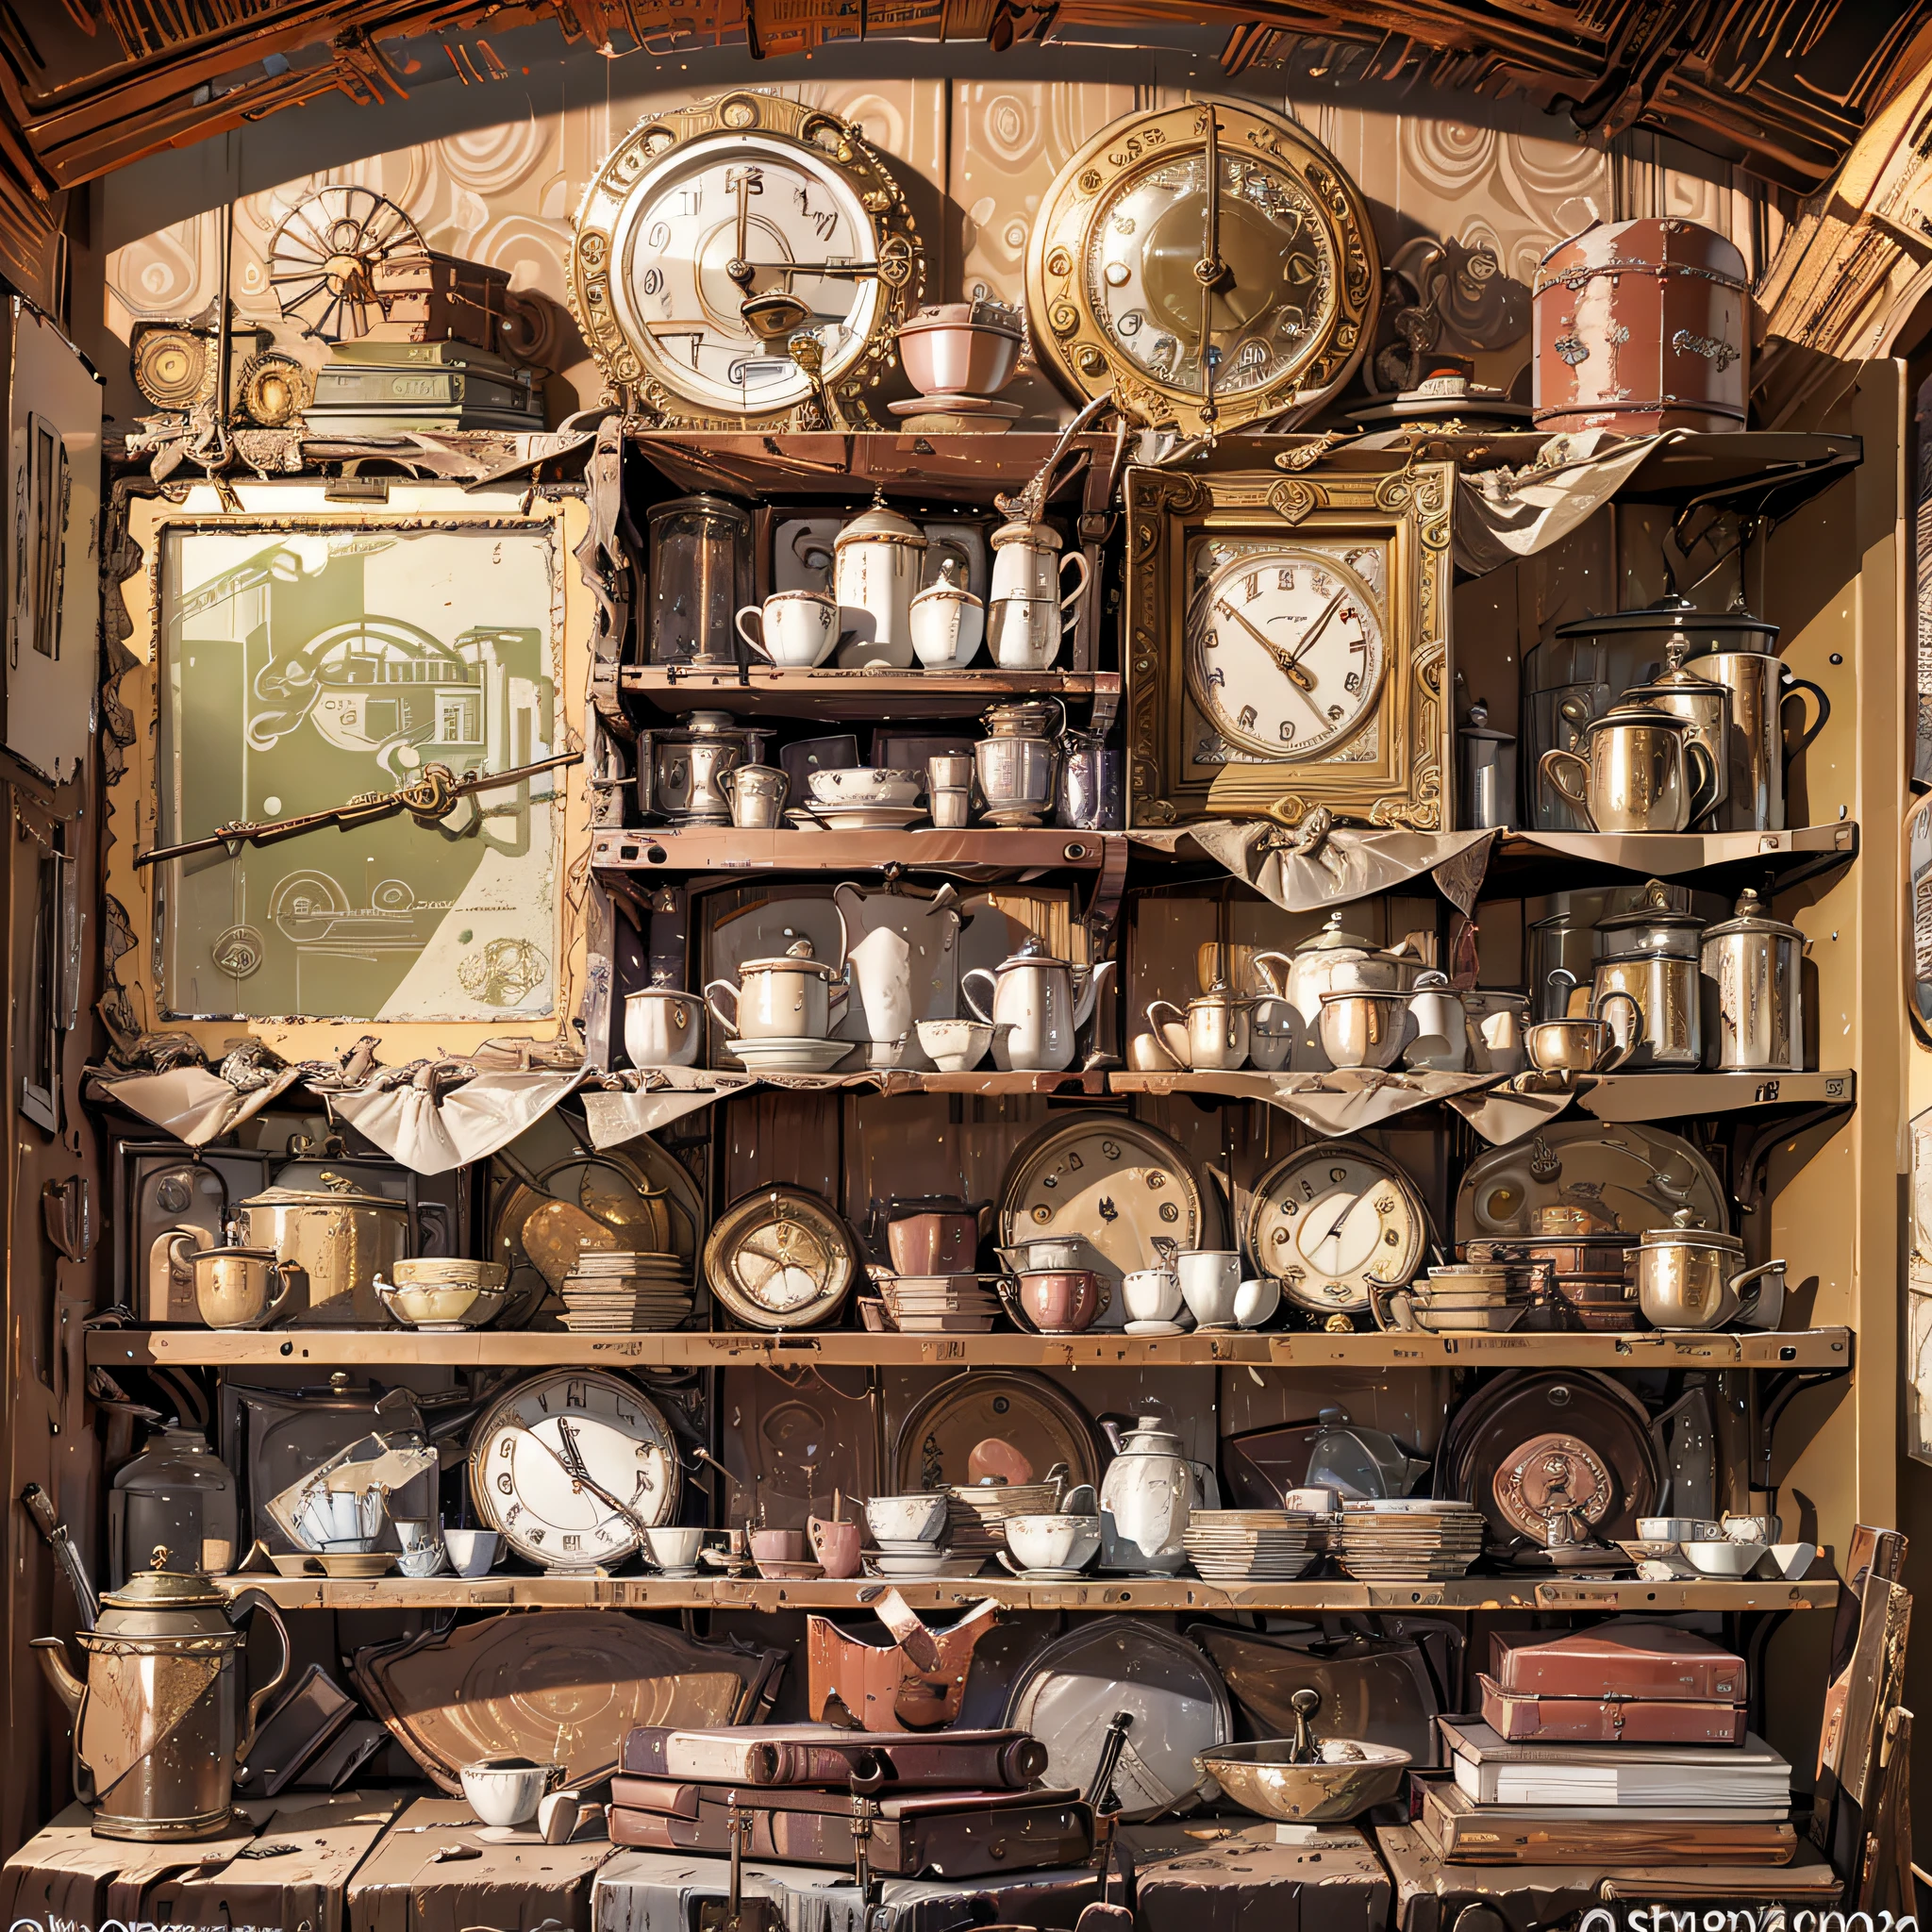 A time traveler's belongings and souvenirs from different eras, displayed on shelves and cabinets in a dusty Victorian room, grimy but ornate. --auto --s2